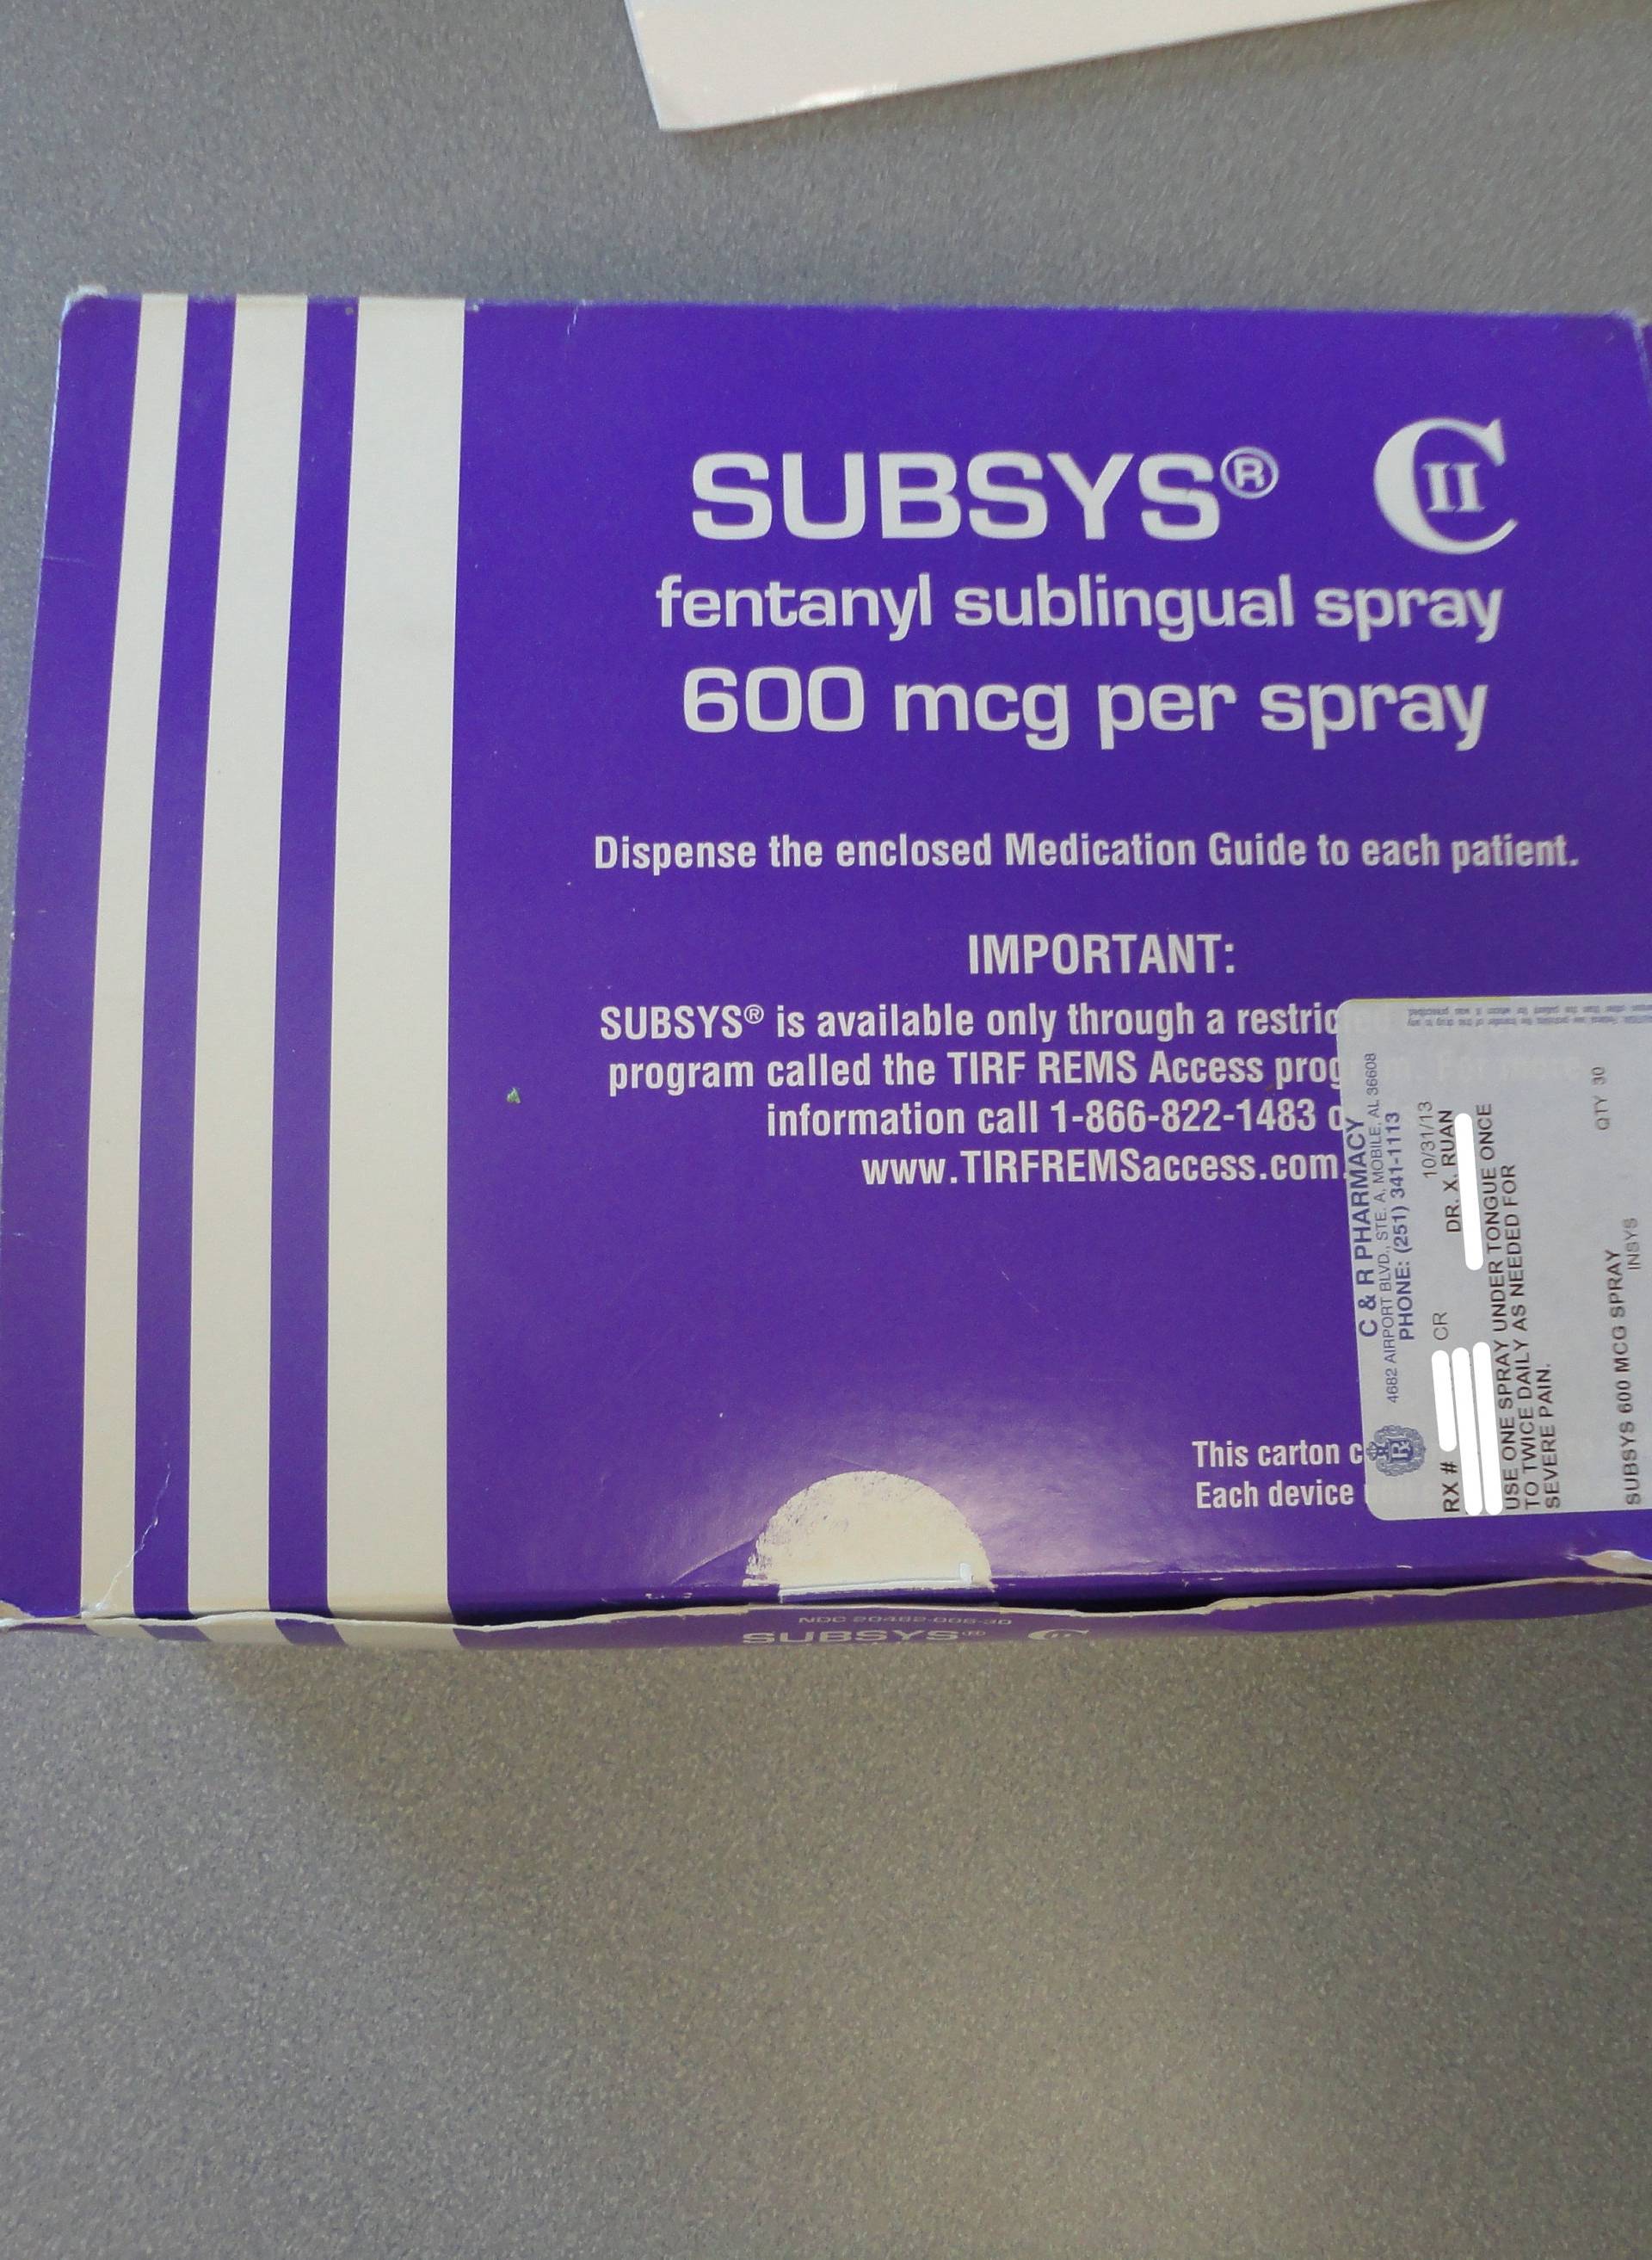 A box of the Fentanyl-based drug Subsys, made by Insys Therapeutics Inc, is seen in an undated photograph provided by the U.S. Attorney's Office for the Southern District of Alabama